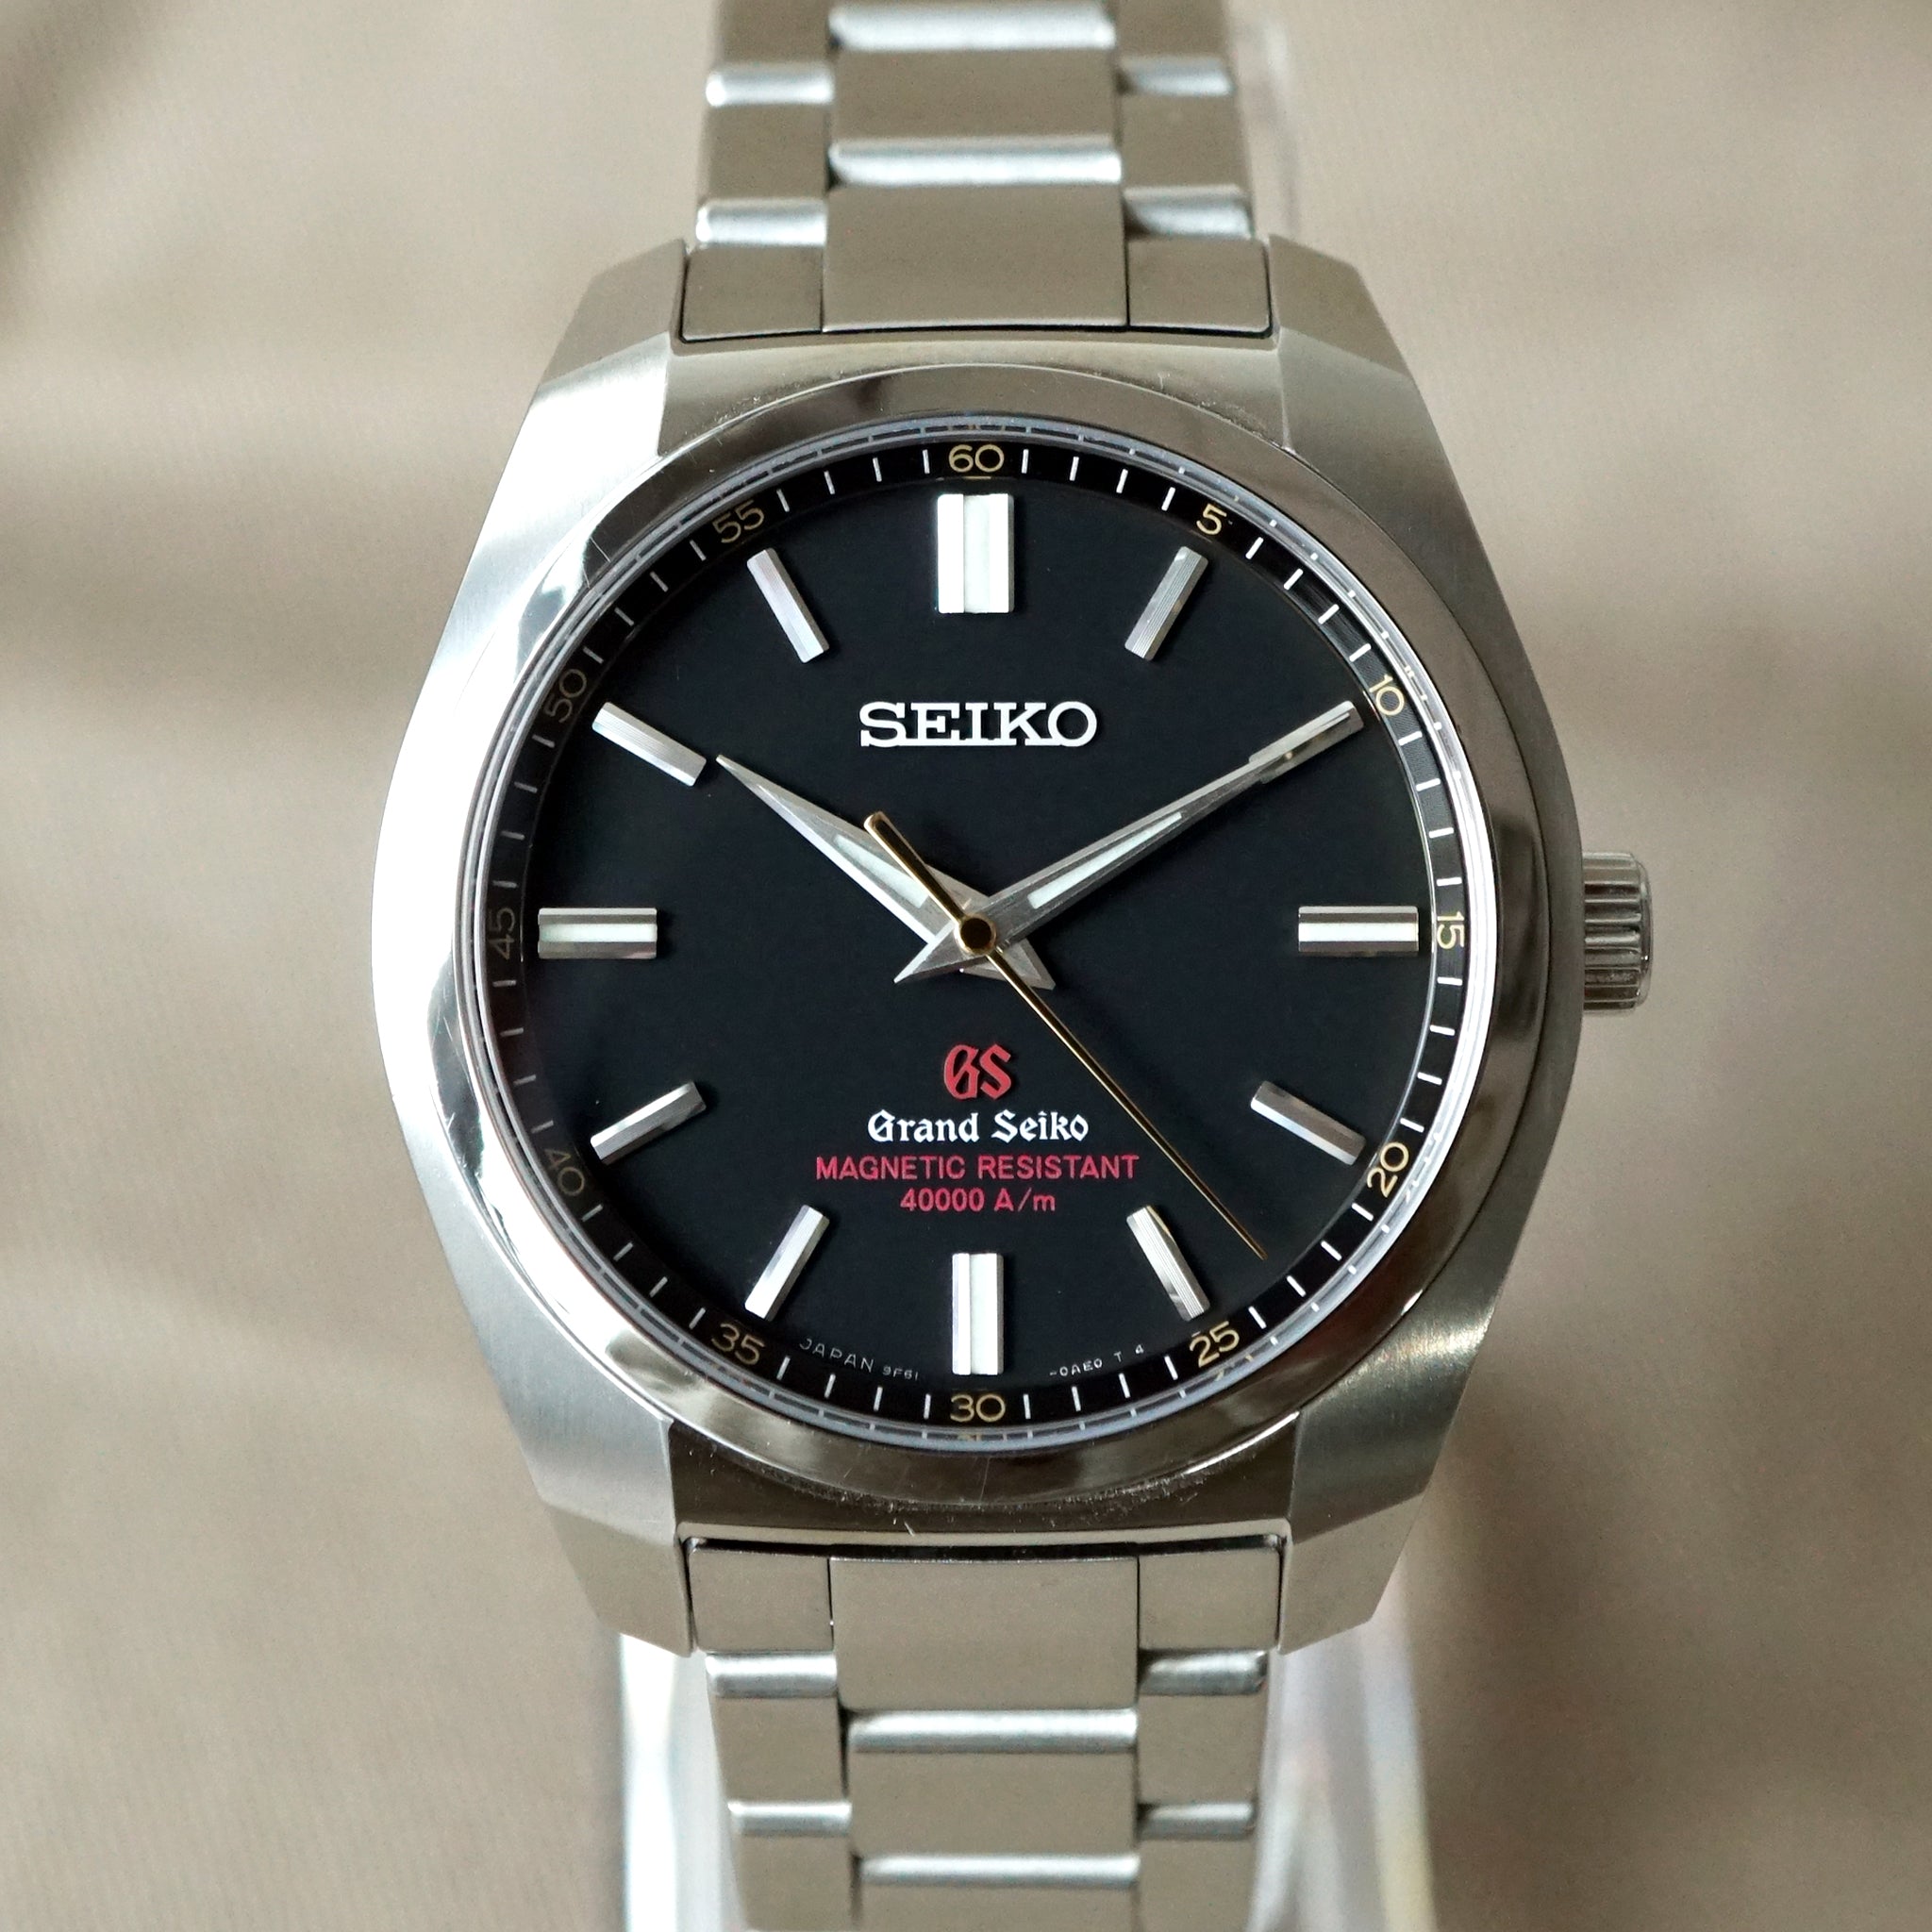 2013 GRAND SEIKO  MAGNETIC RESISTANT 40000 A/m 500 LIMITED –  NOSTIME